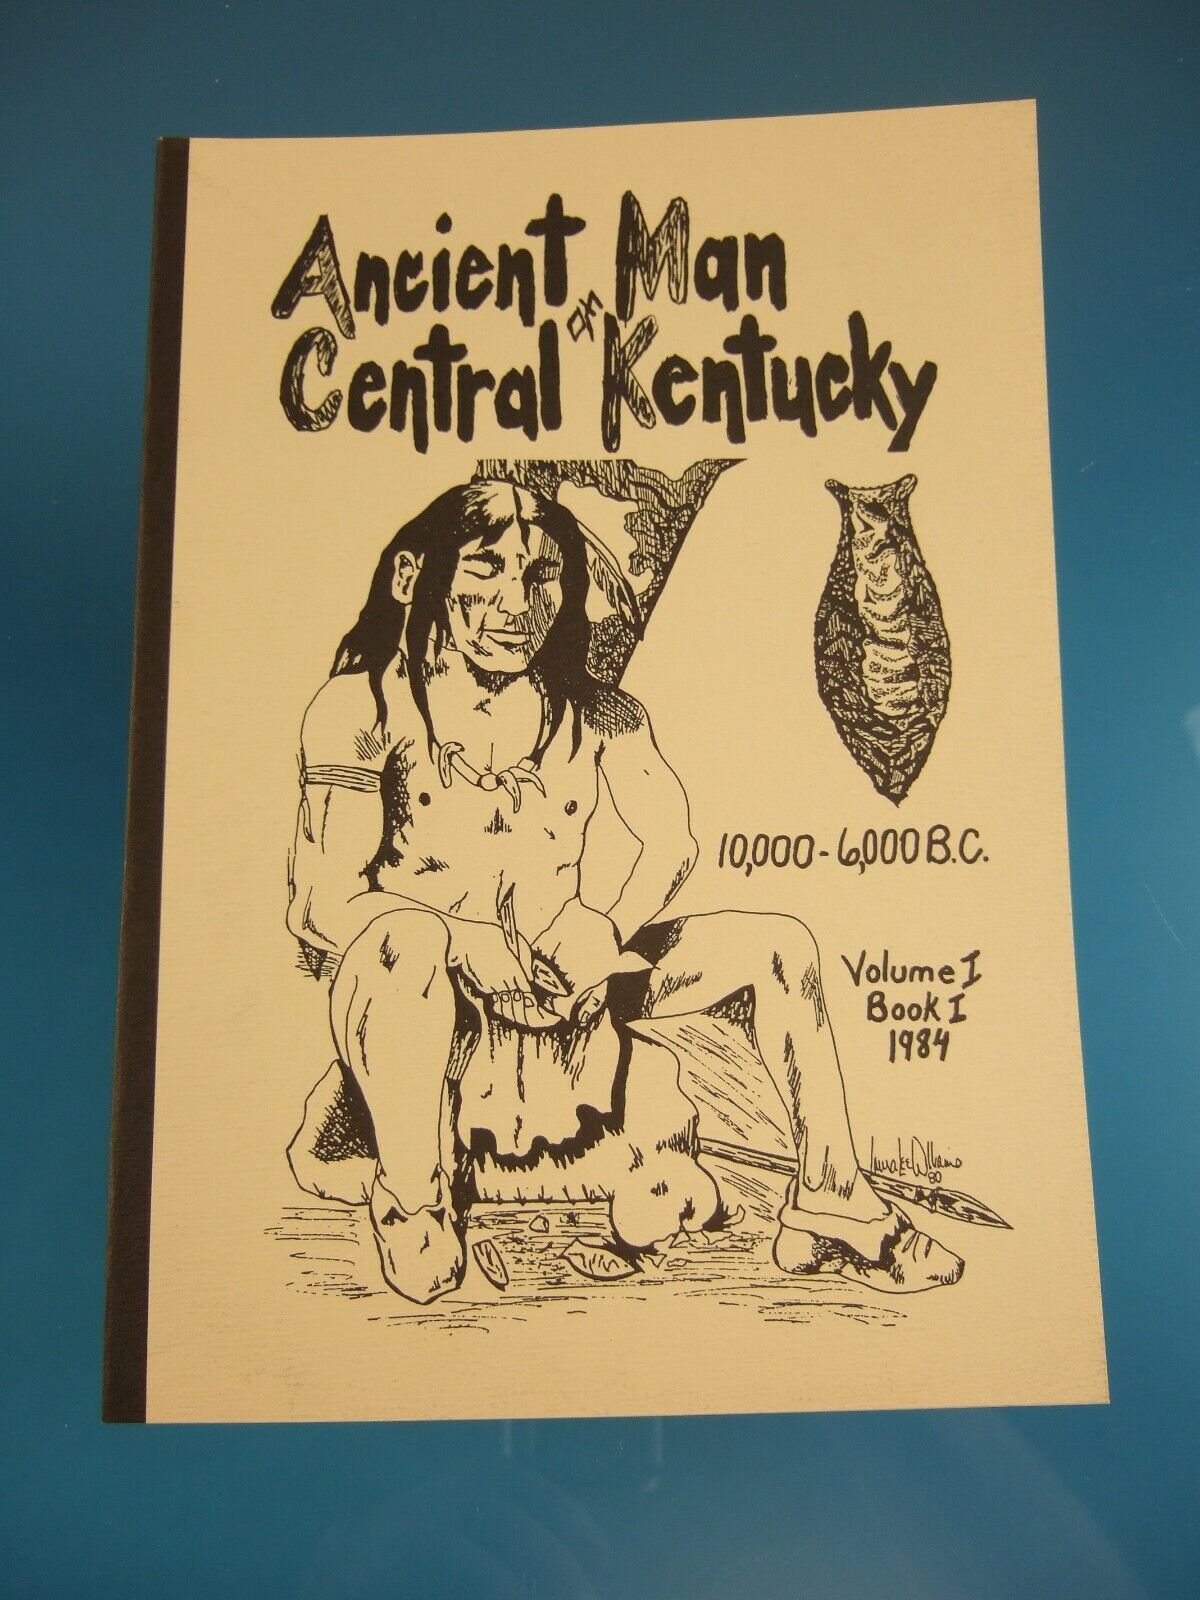 New Mint Copy 1984 Ancient Man of Central Kentucky Arrowheads Artifacts Book